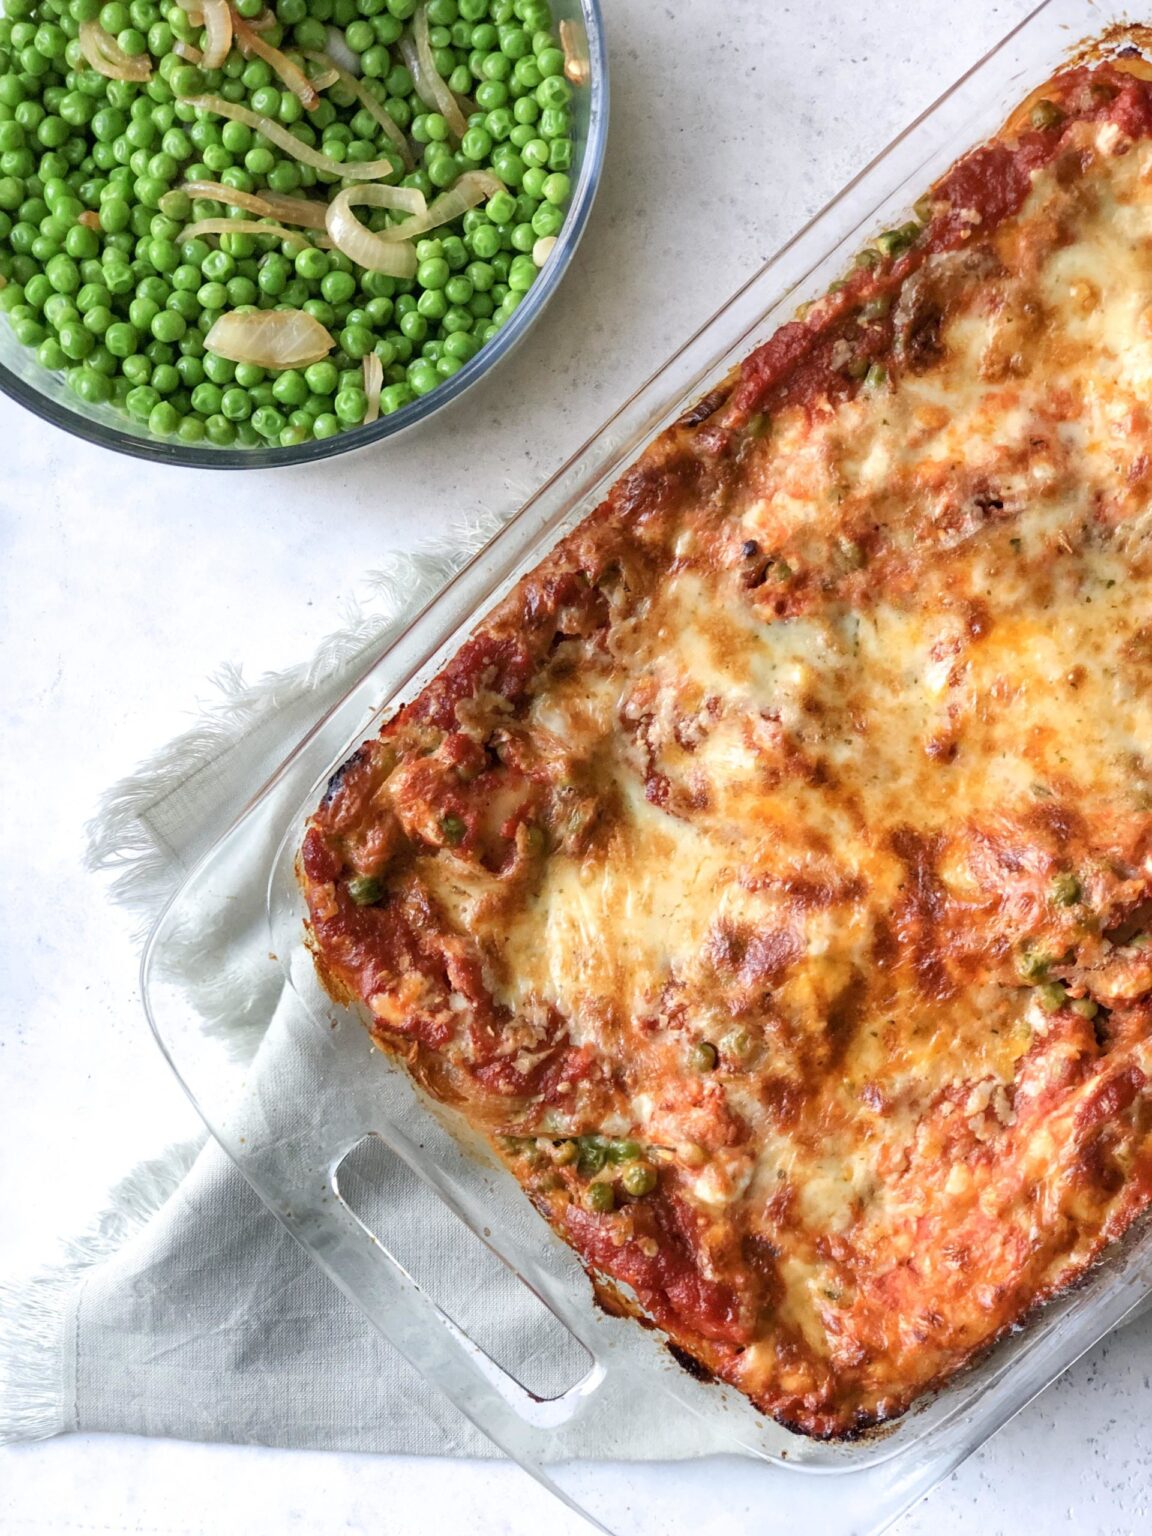 How to bake a Classic Vegetable Lasagna